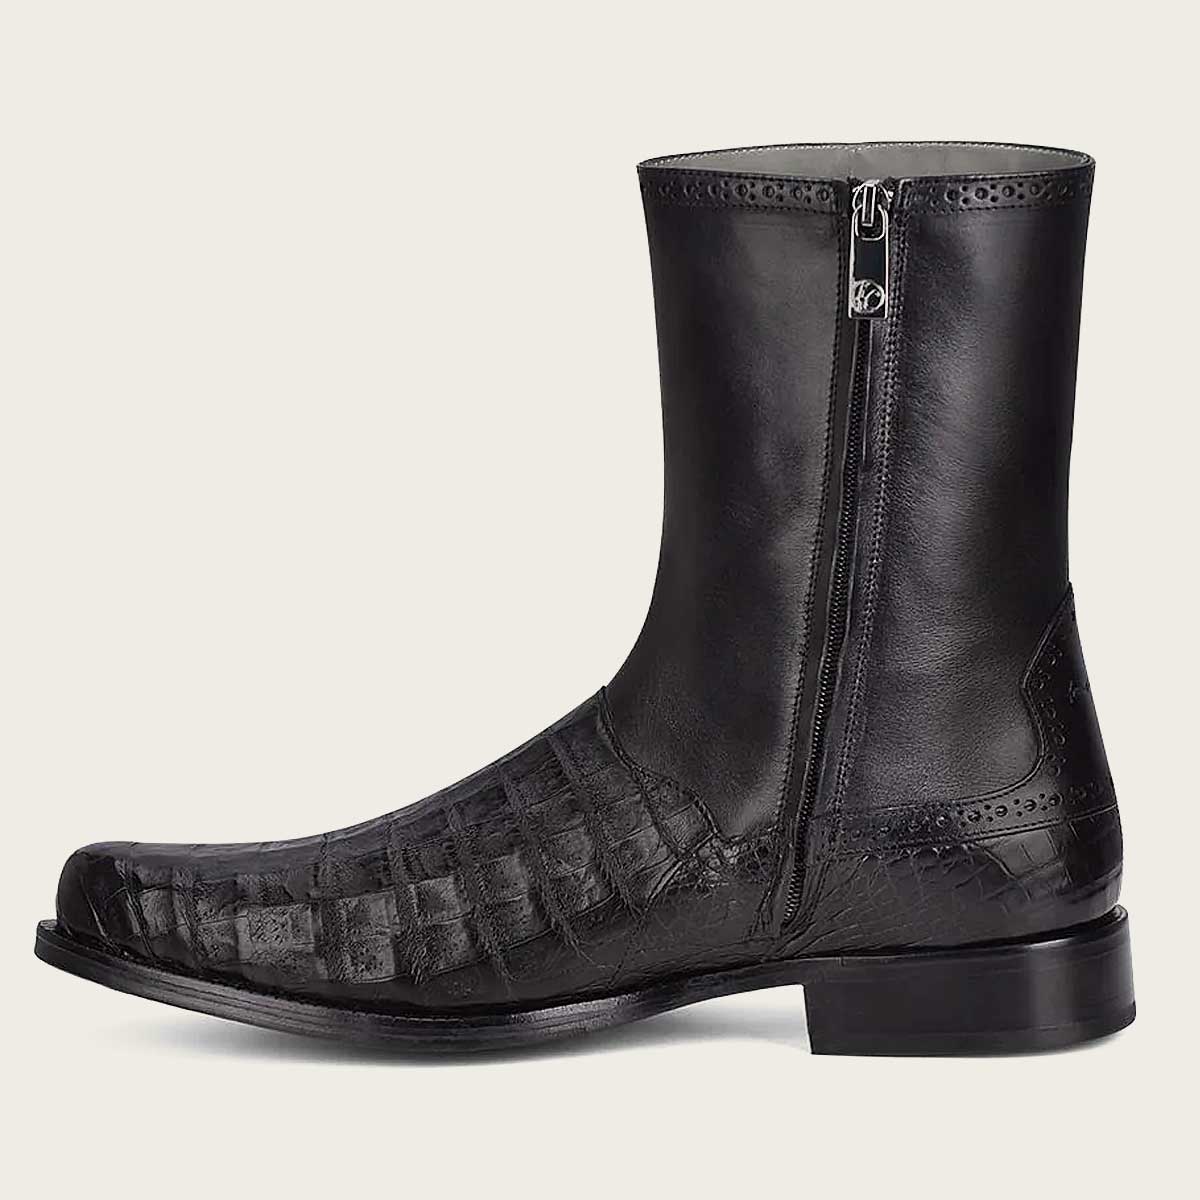 Exotic black leather boot, hand-painted for a one-of-a-kind style statement.